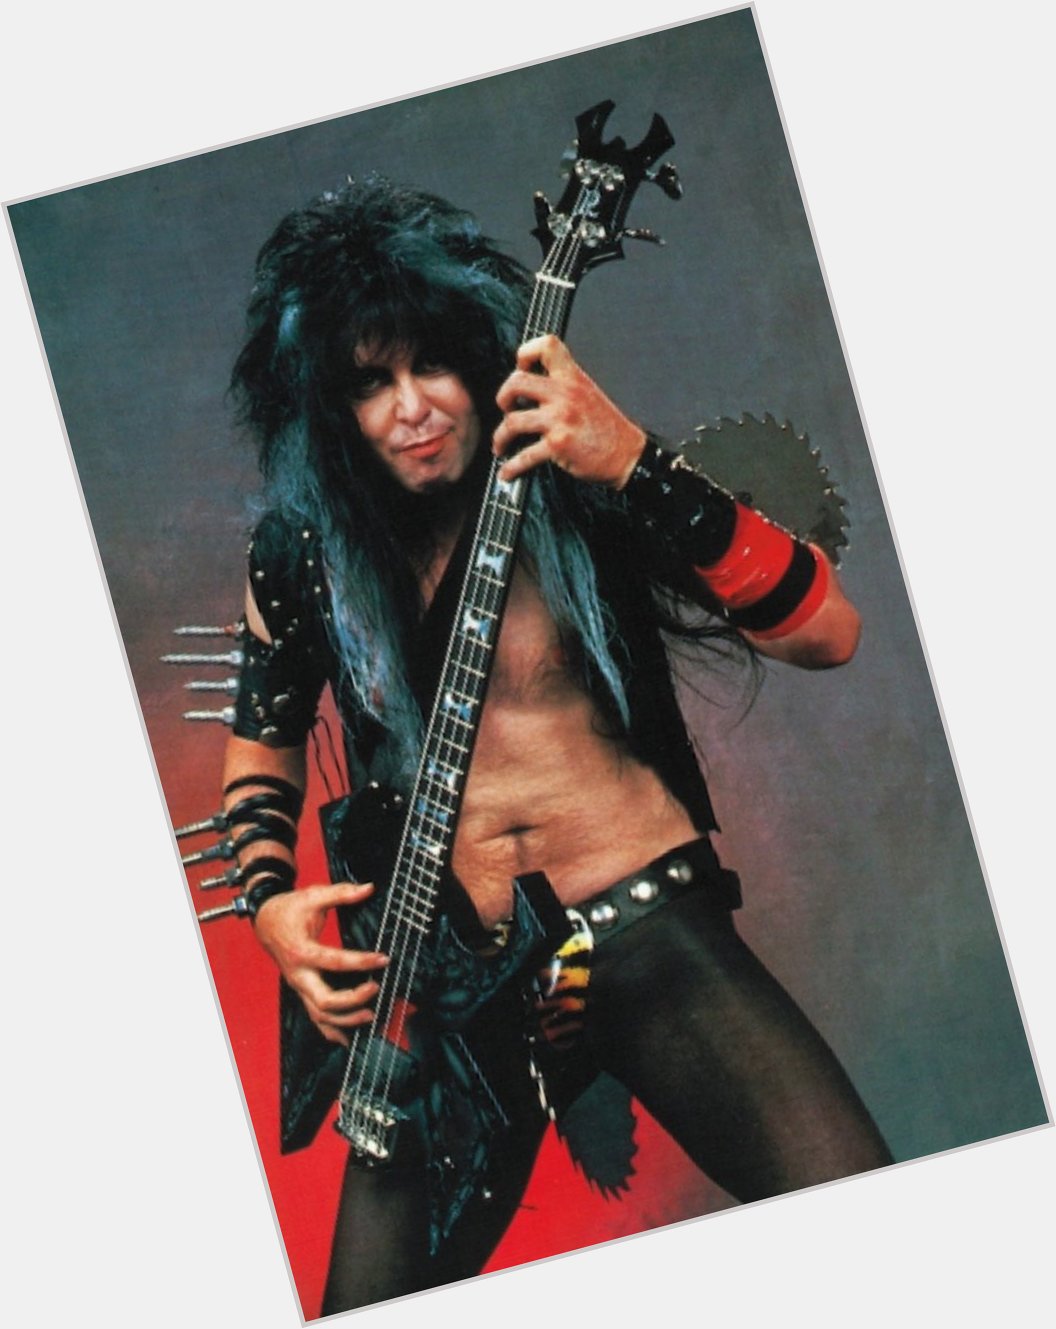 Happy birthday to Blackie Lawless from W.A.S.P, who turns 66 years old today. 